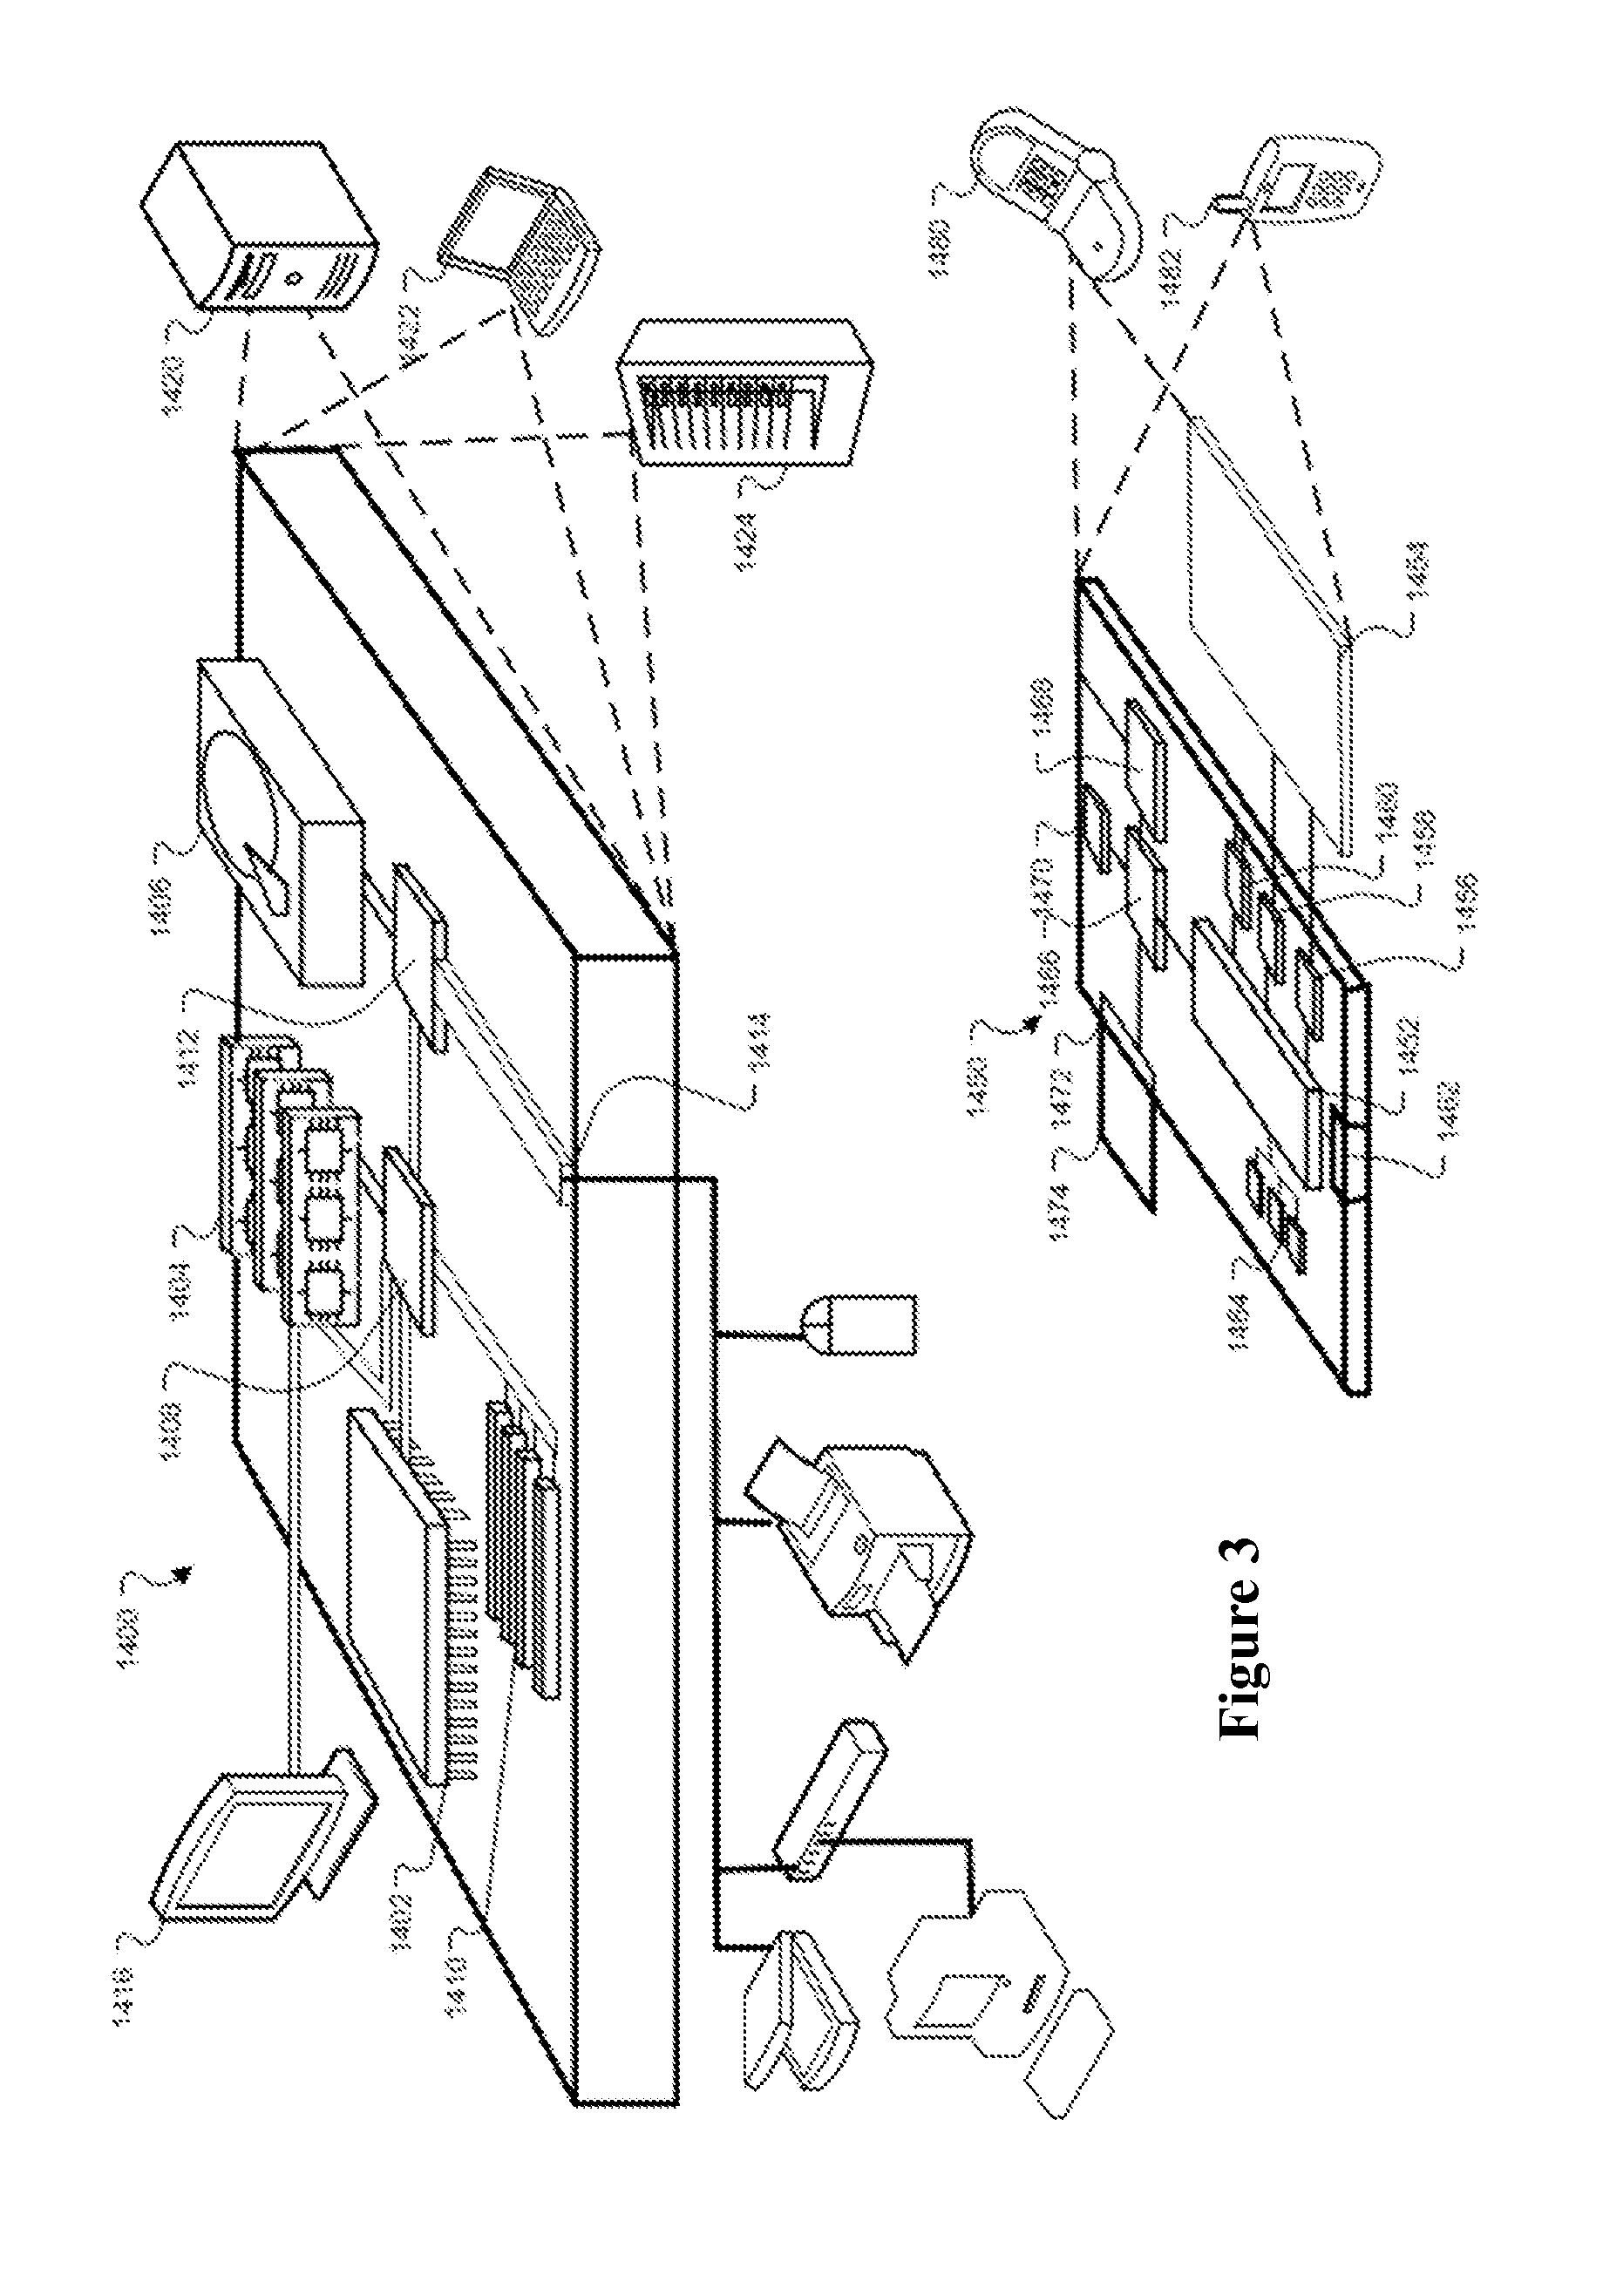 Methods and materials for reducing the risk of infections